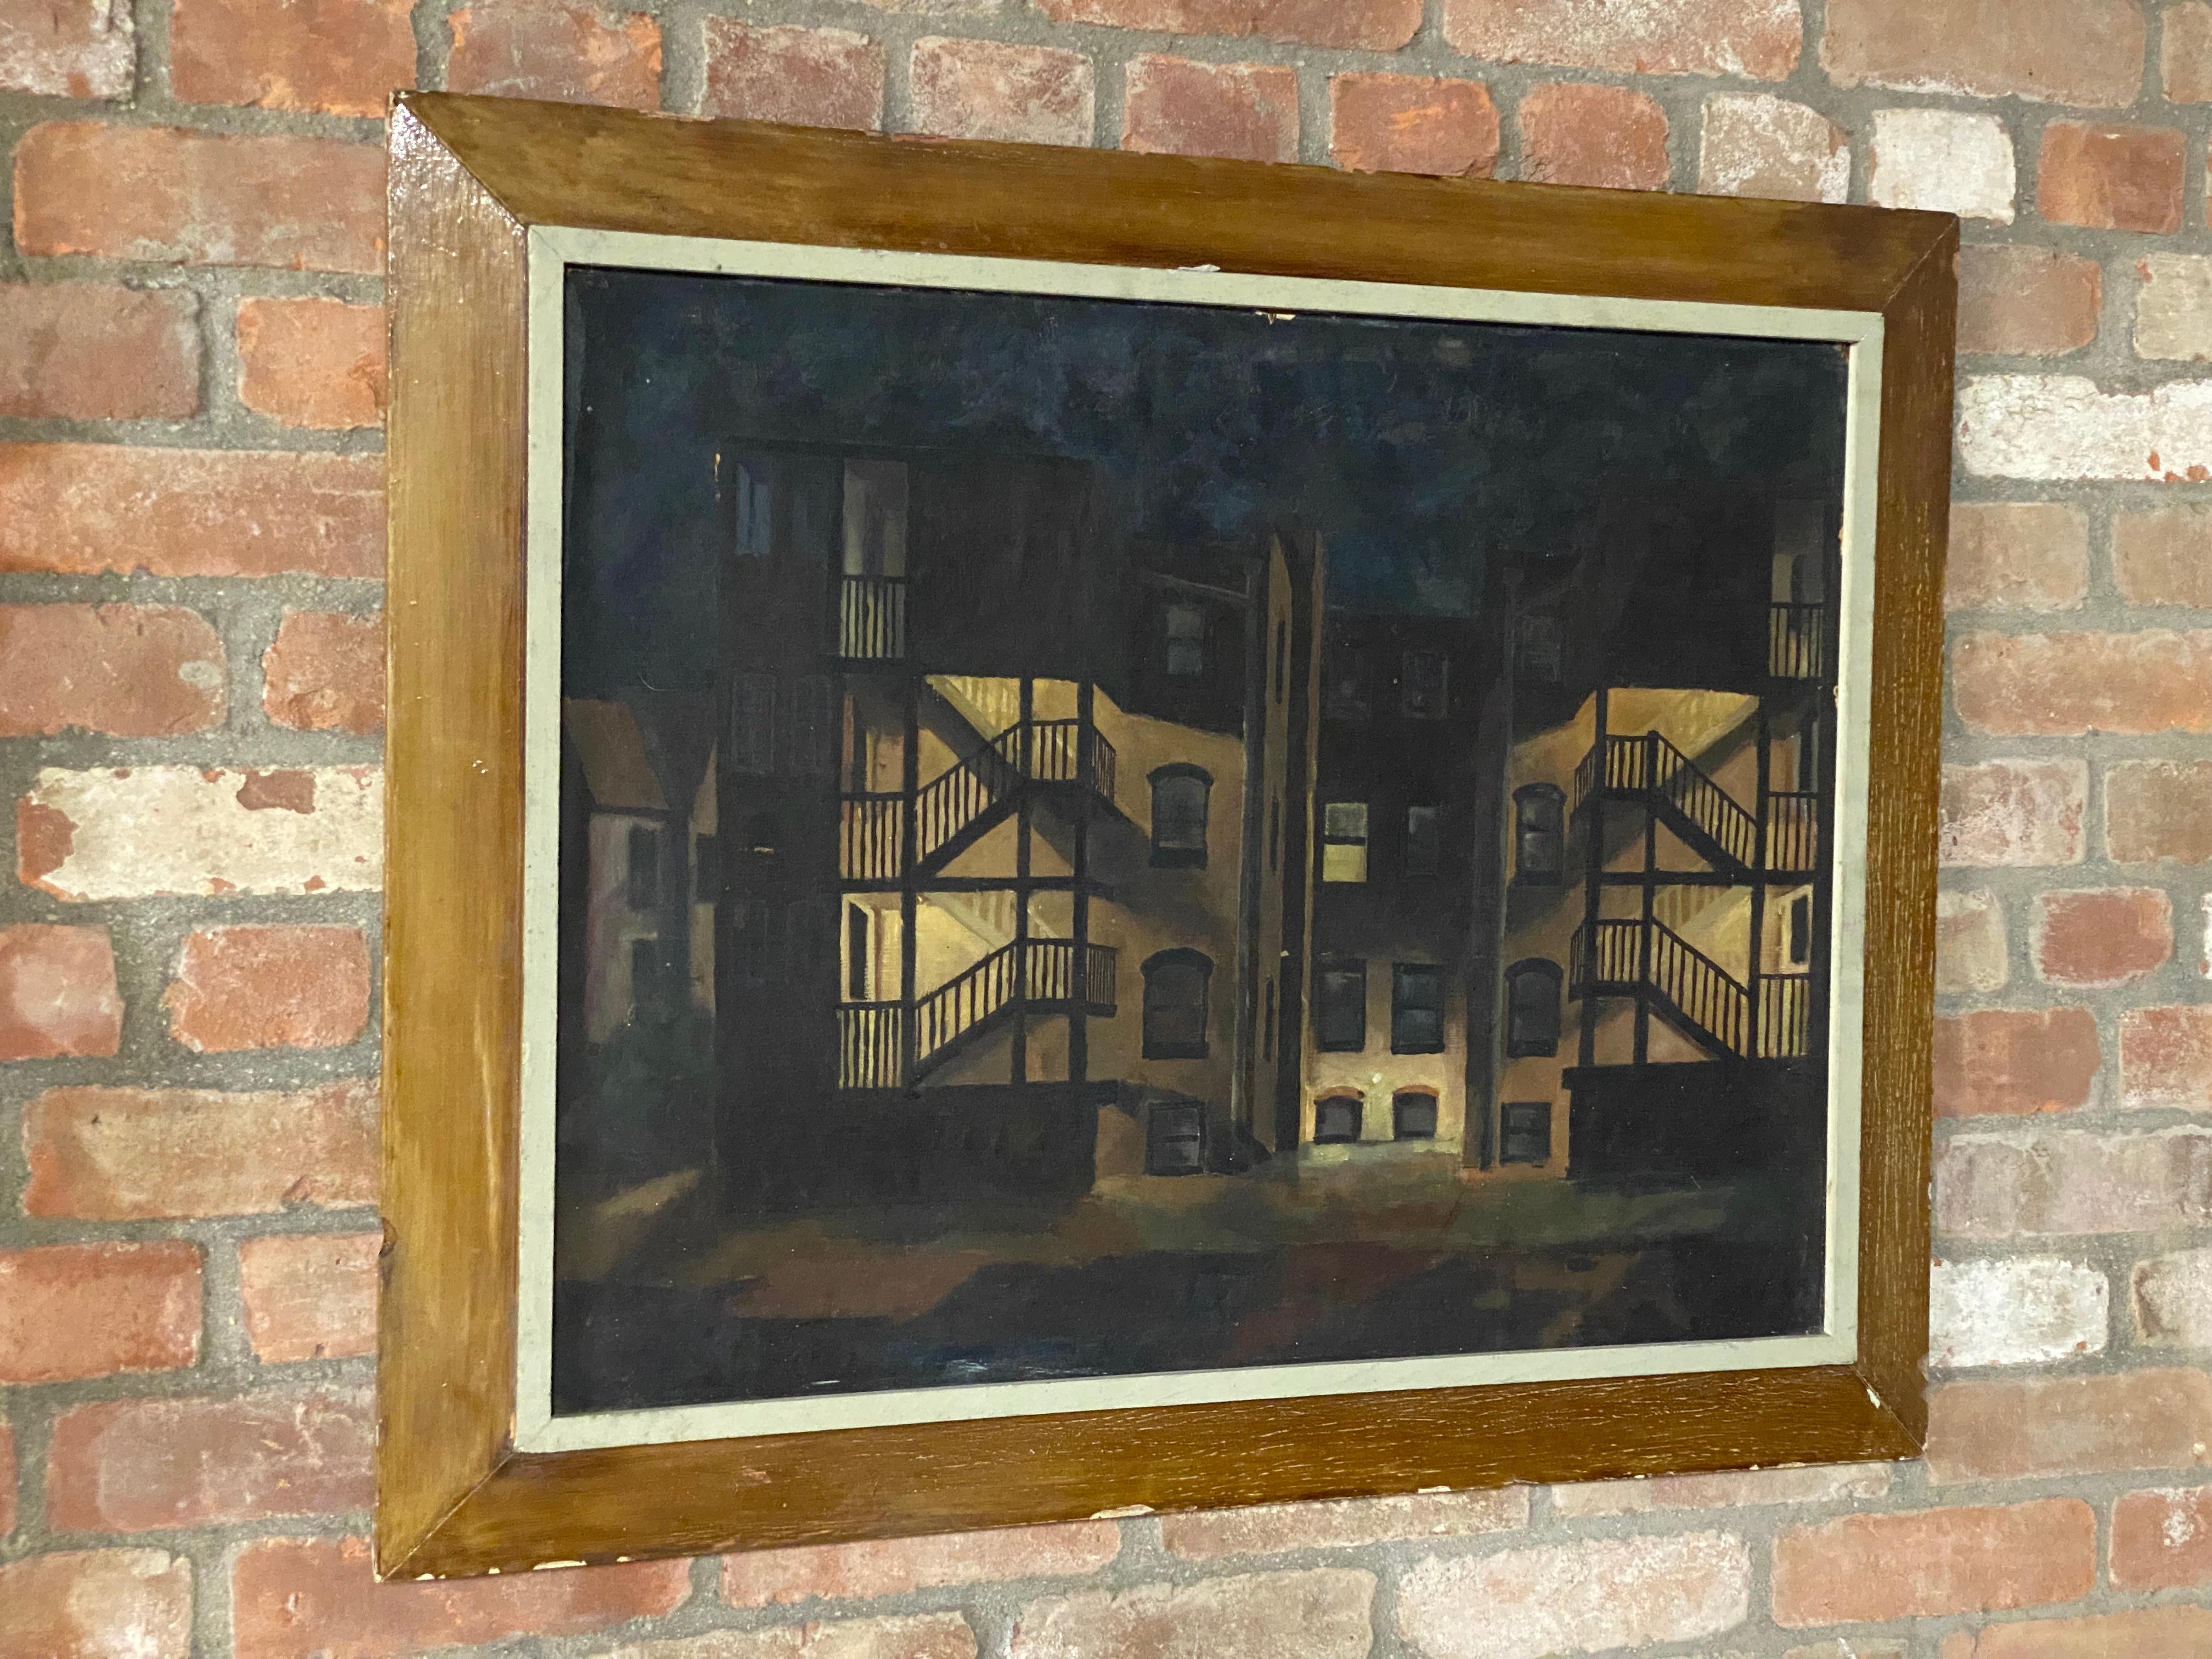 Purchased straight from the Estate of Leonard Buzz Wallace. Painted by Wallace who taught and lectured on fine art at Orange County Community College, Middletown, NY through out the 1960-80s. Wallace's talent and output ranged from later large